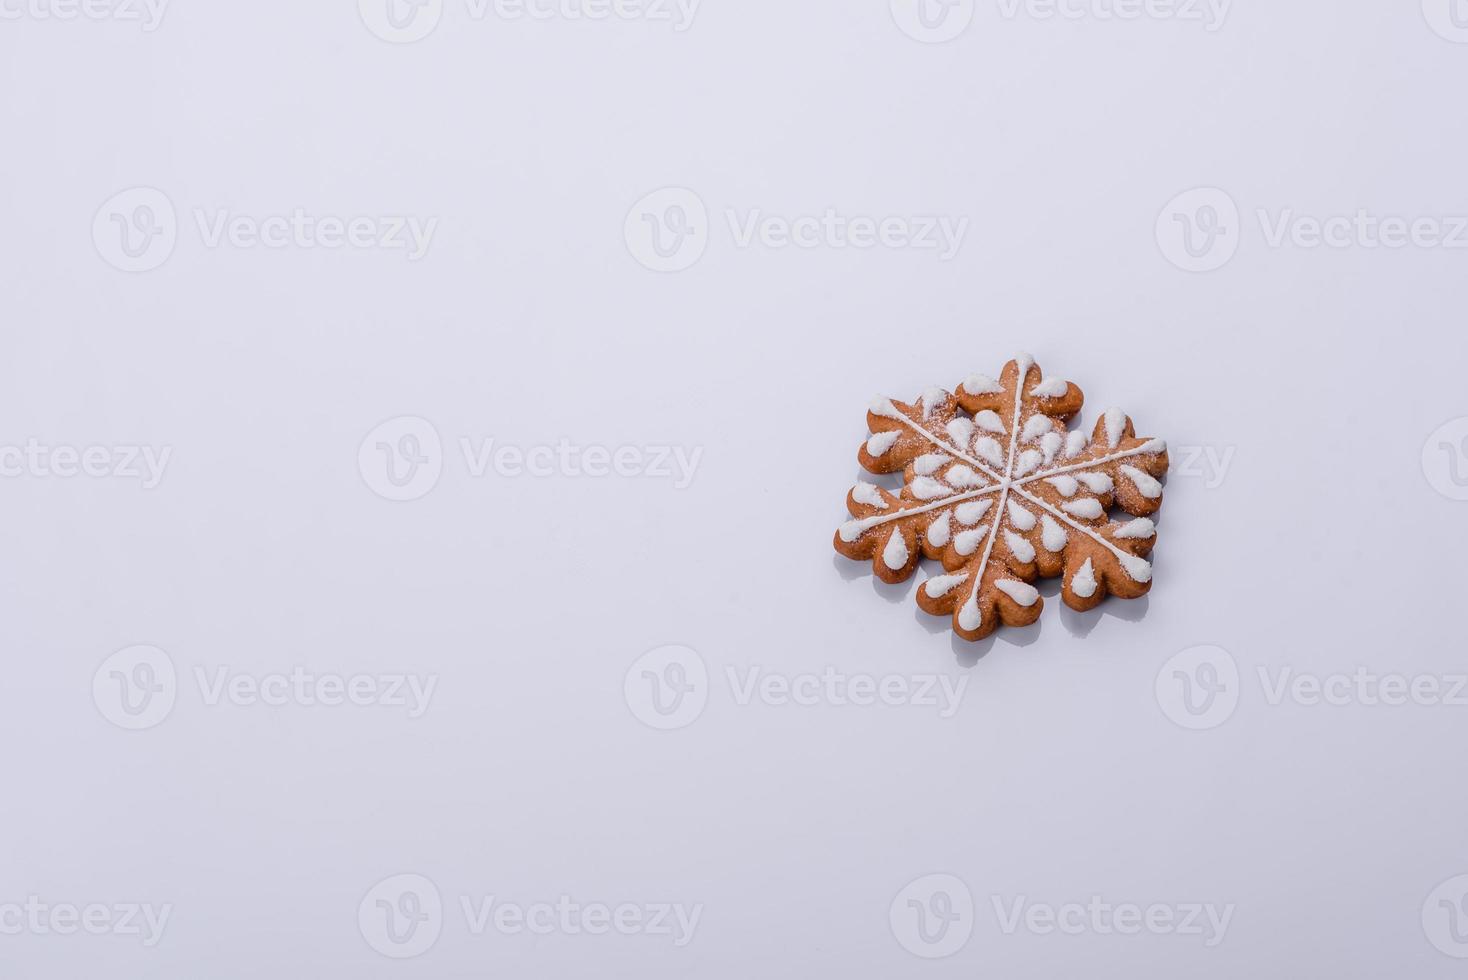 Elements of Christmas scenery, toys, gingerbread and other Christmas tree decorations photo